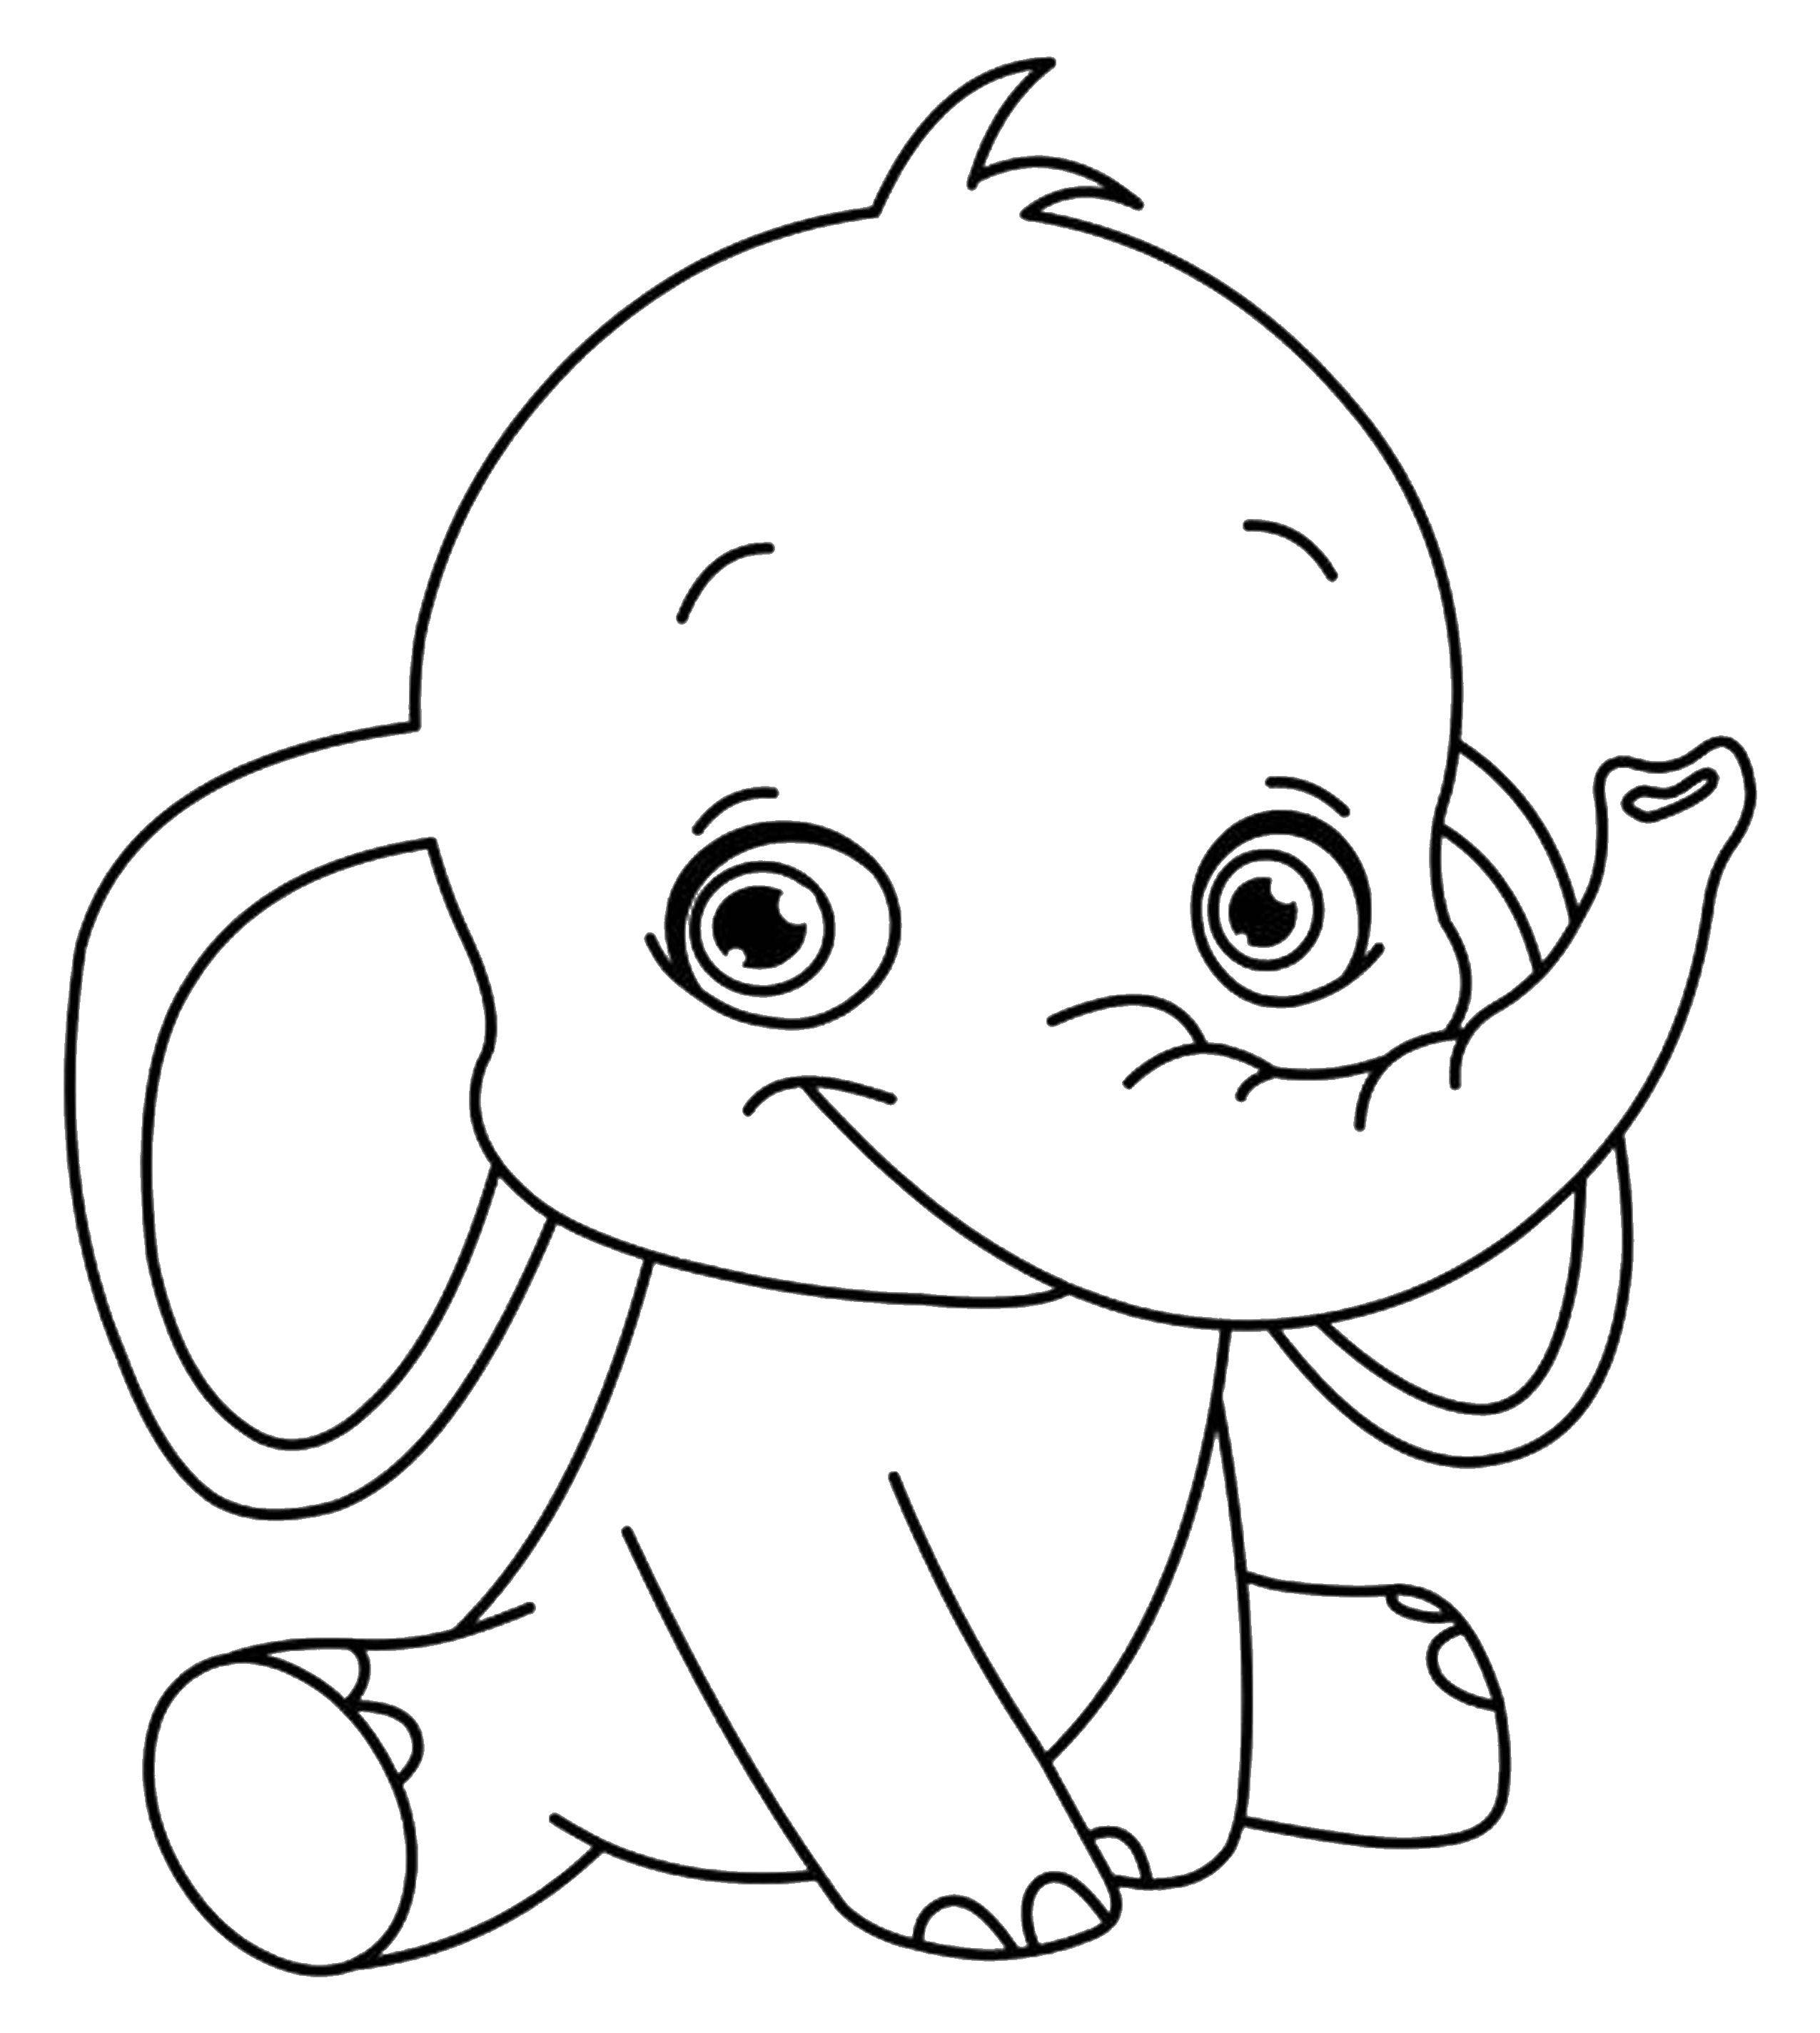 Coloring Little elephant. Category Disney coloring pages. Tags:  elephant, trunk, ears.